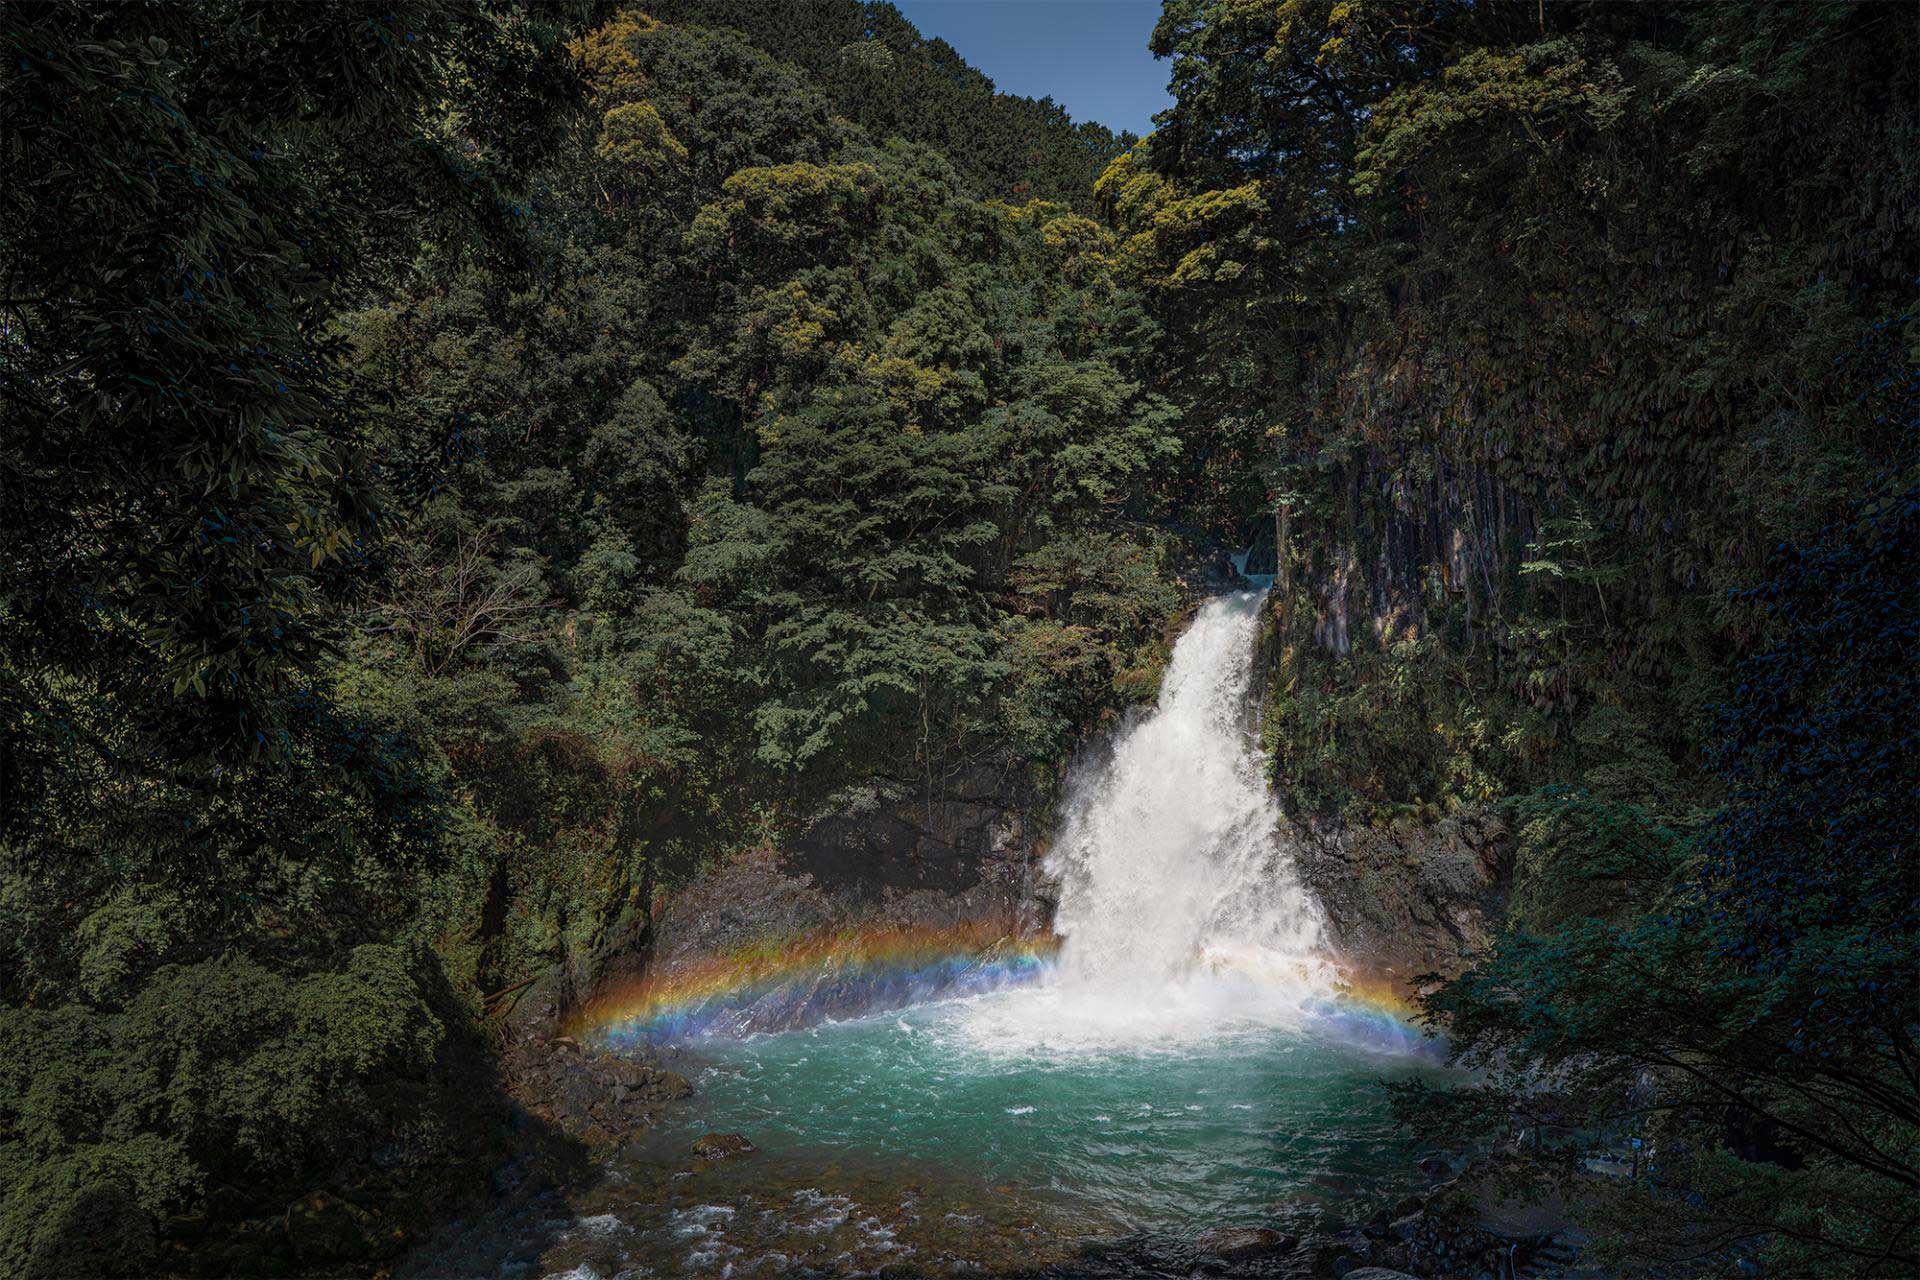 Colorfully Dressed Waterfall | London Photography Awards